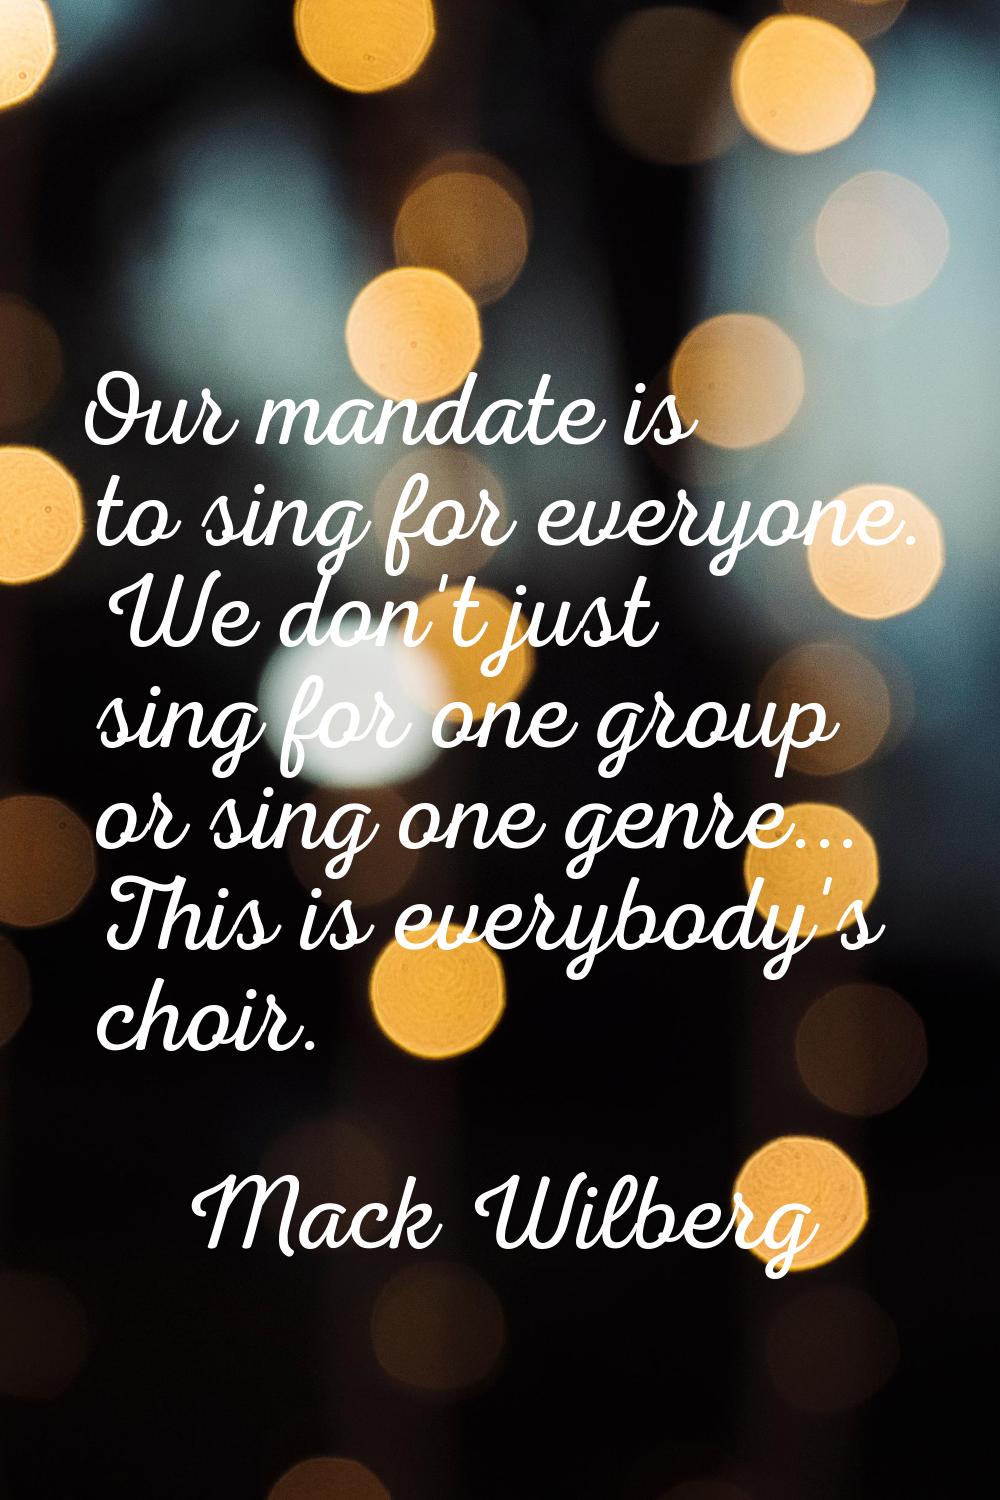 Our mandate is to sing for everyone. We don't just sing for one group or sing one genre... This is 